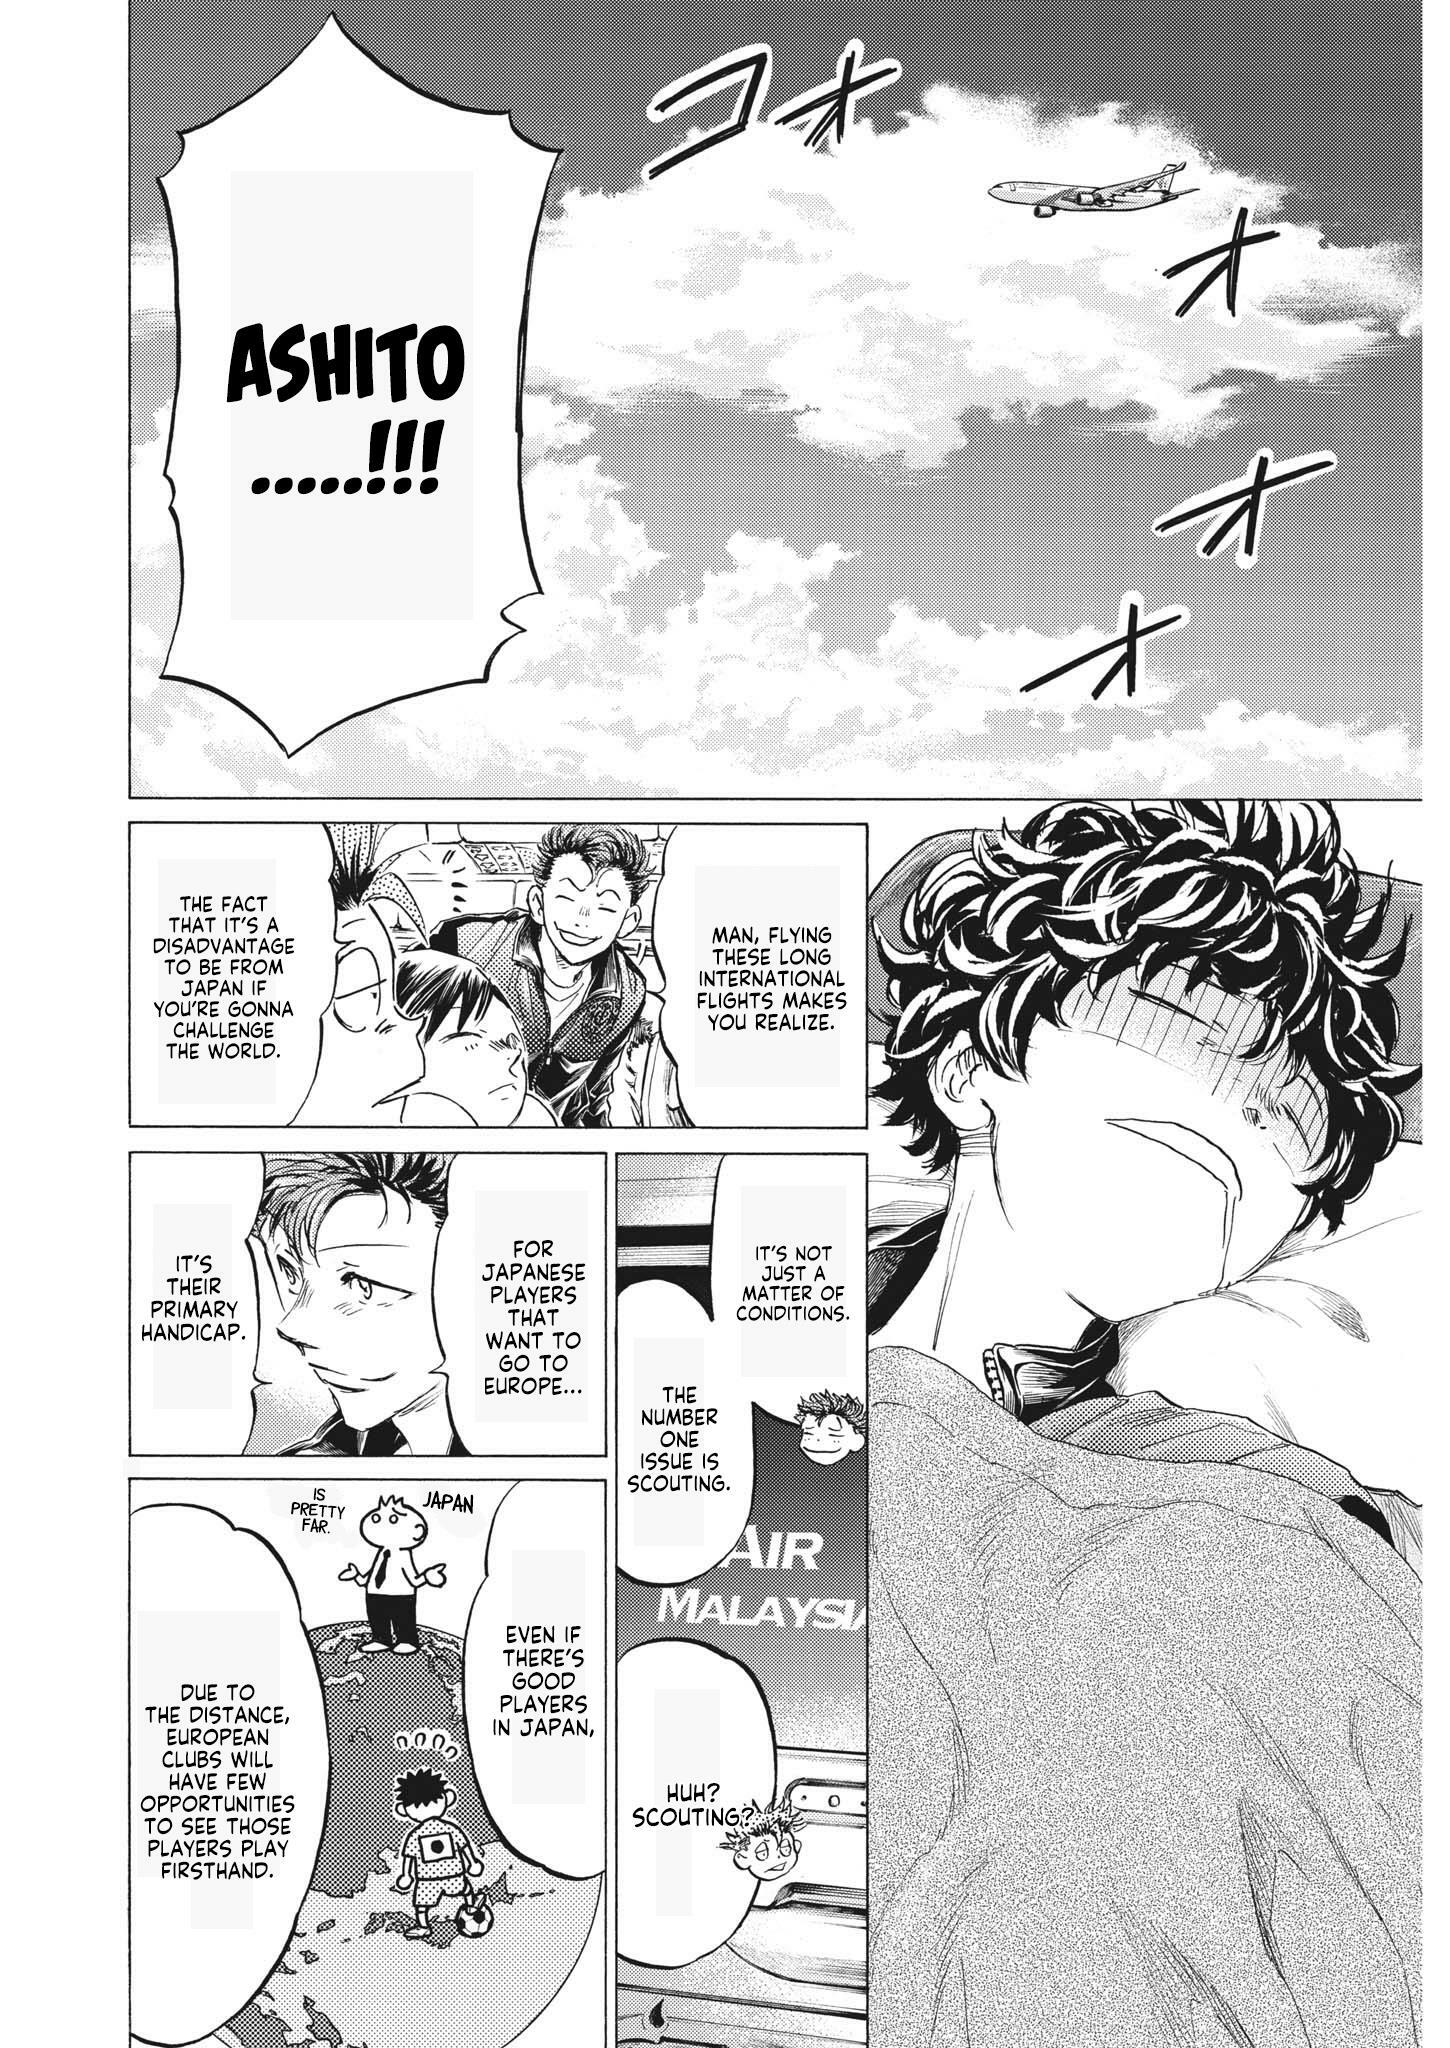 Read Ao Ashi Chapter 344: Proof Of His Path - Manganelo